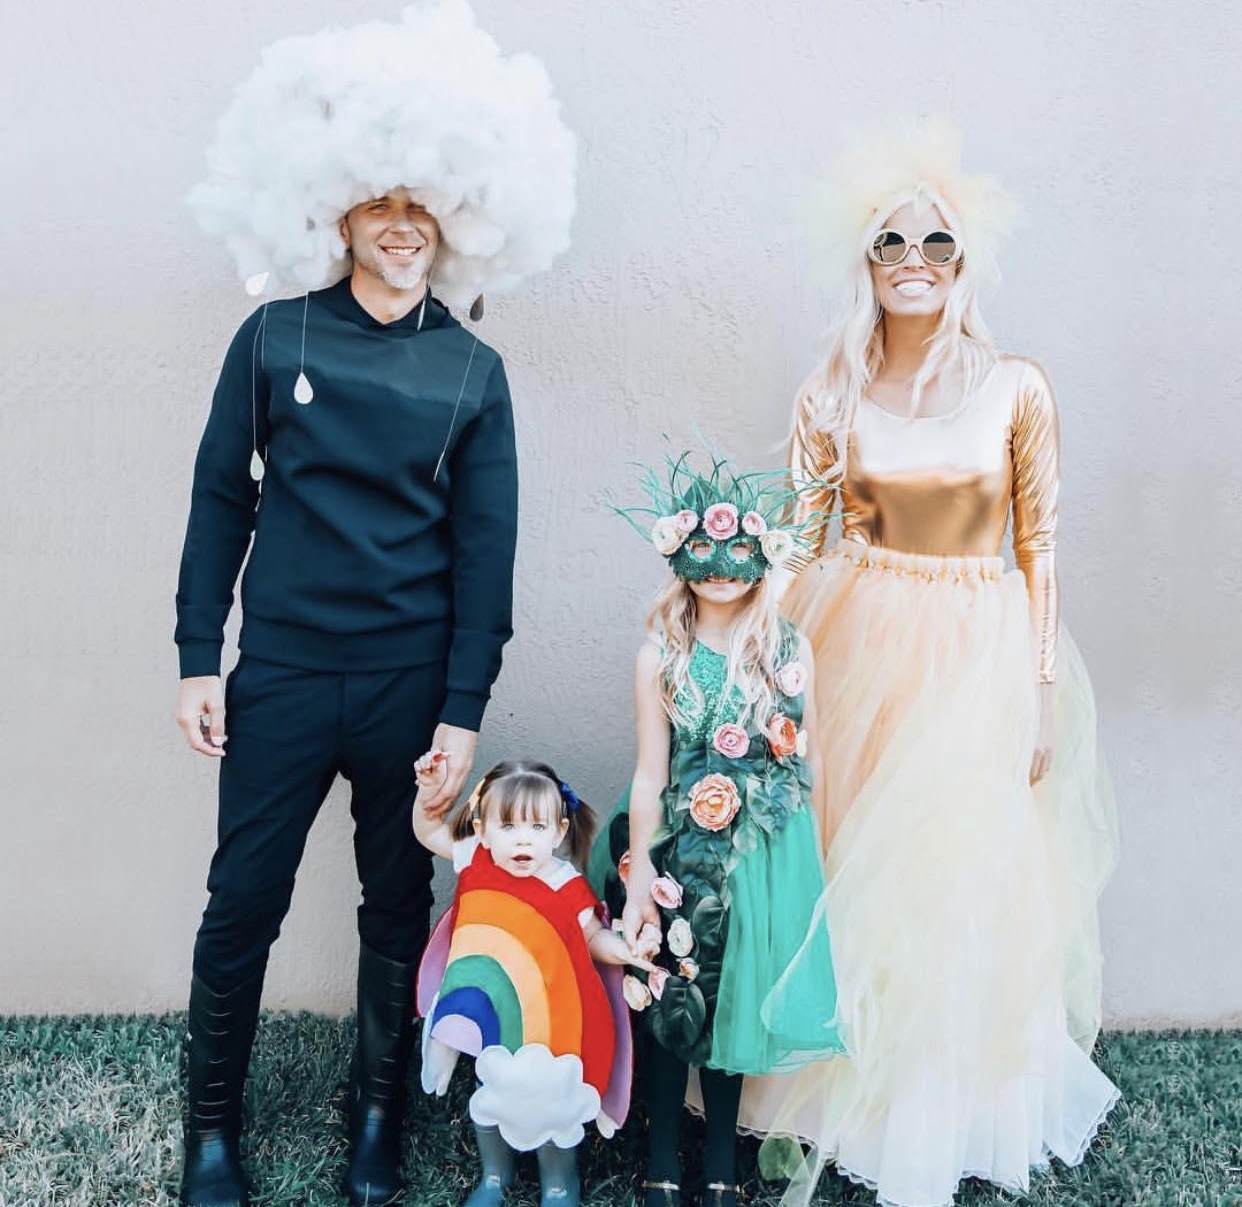 HALLOWEEN COSTUME ROUNDUP PART 2 — The Ever Co